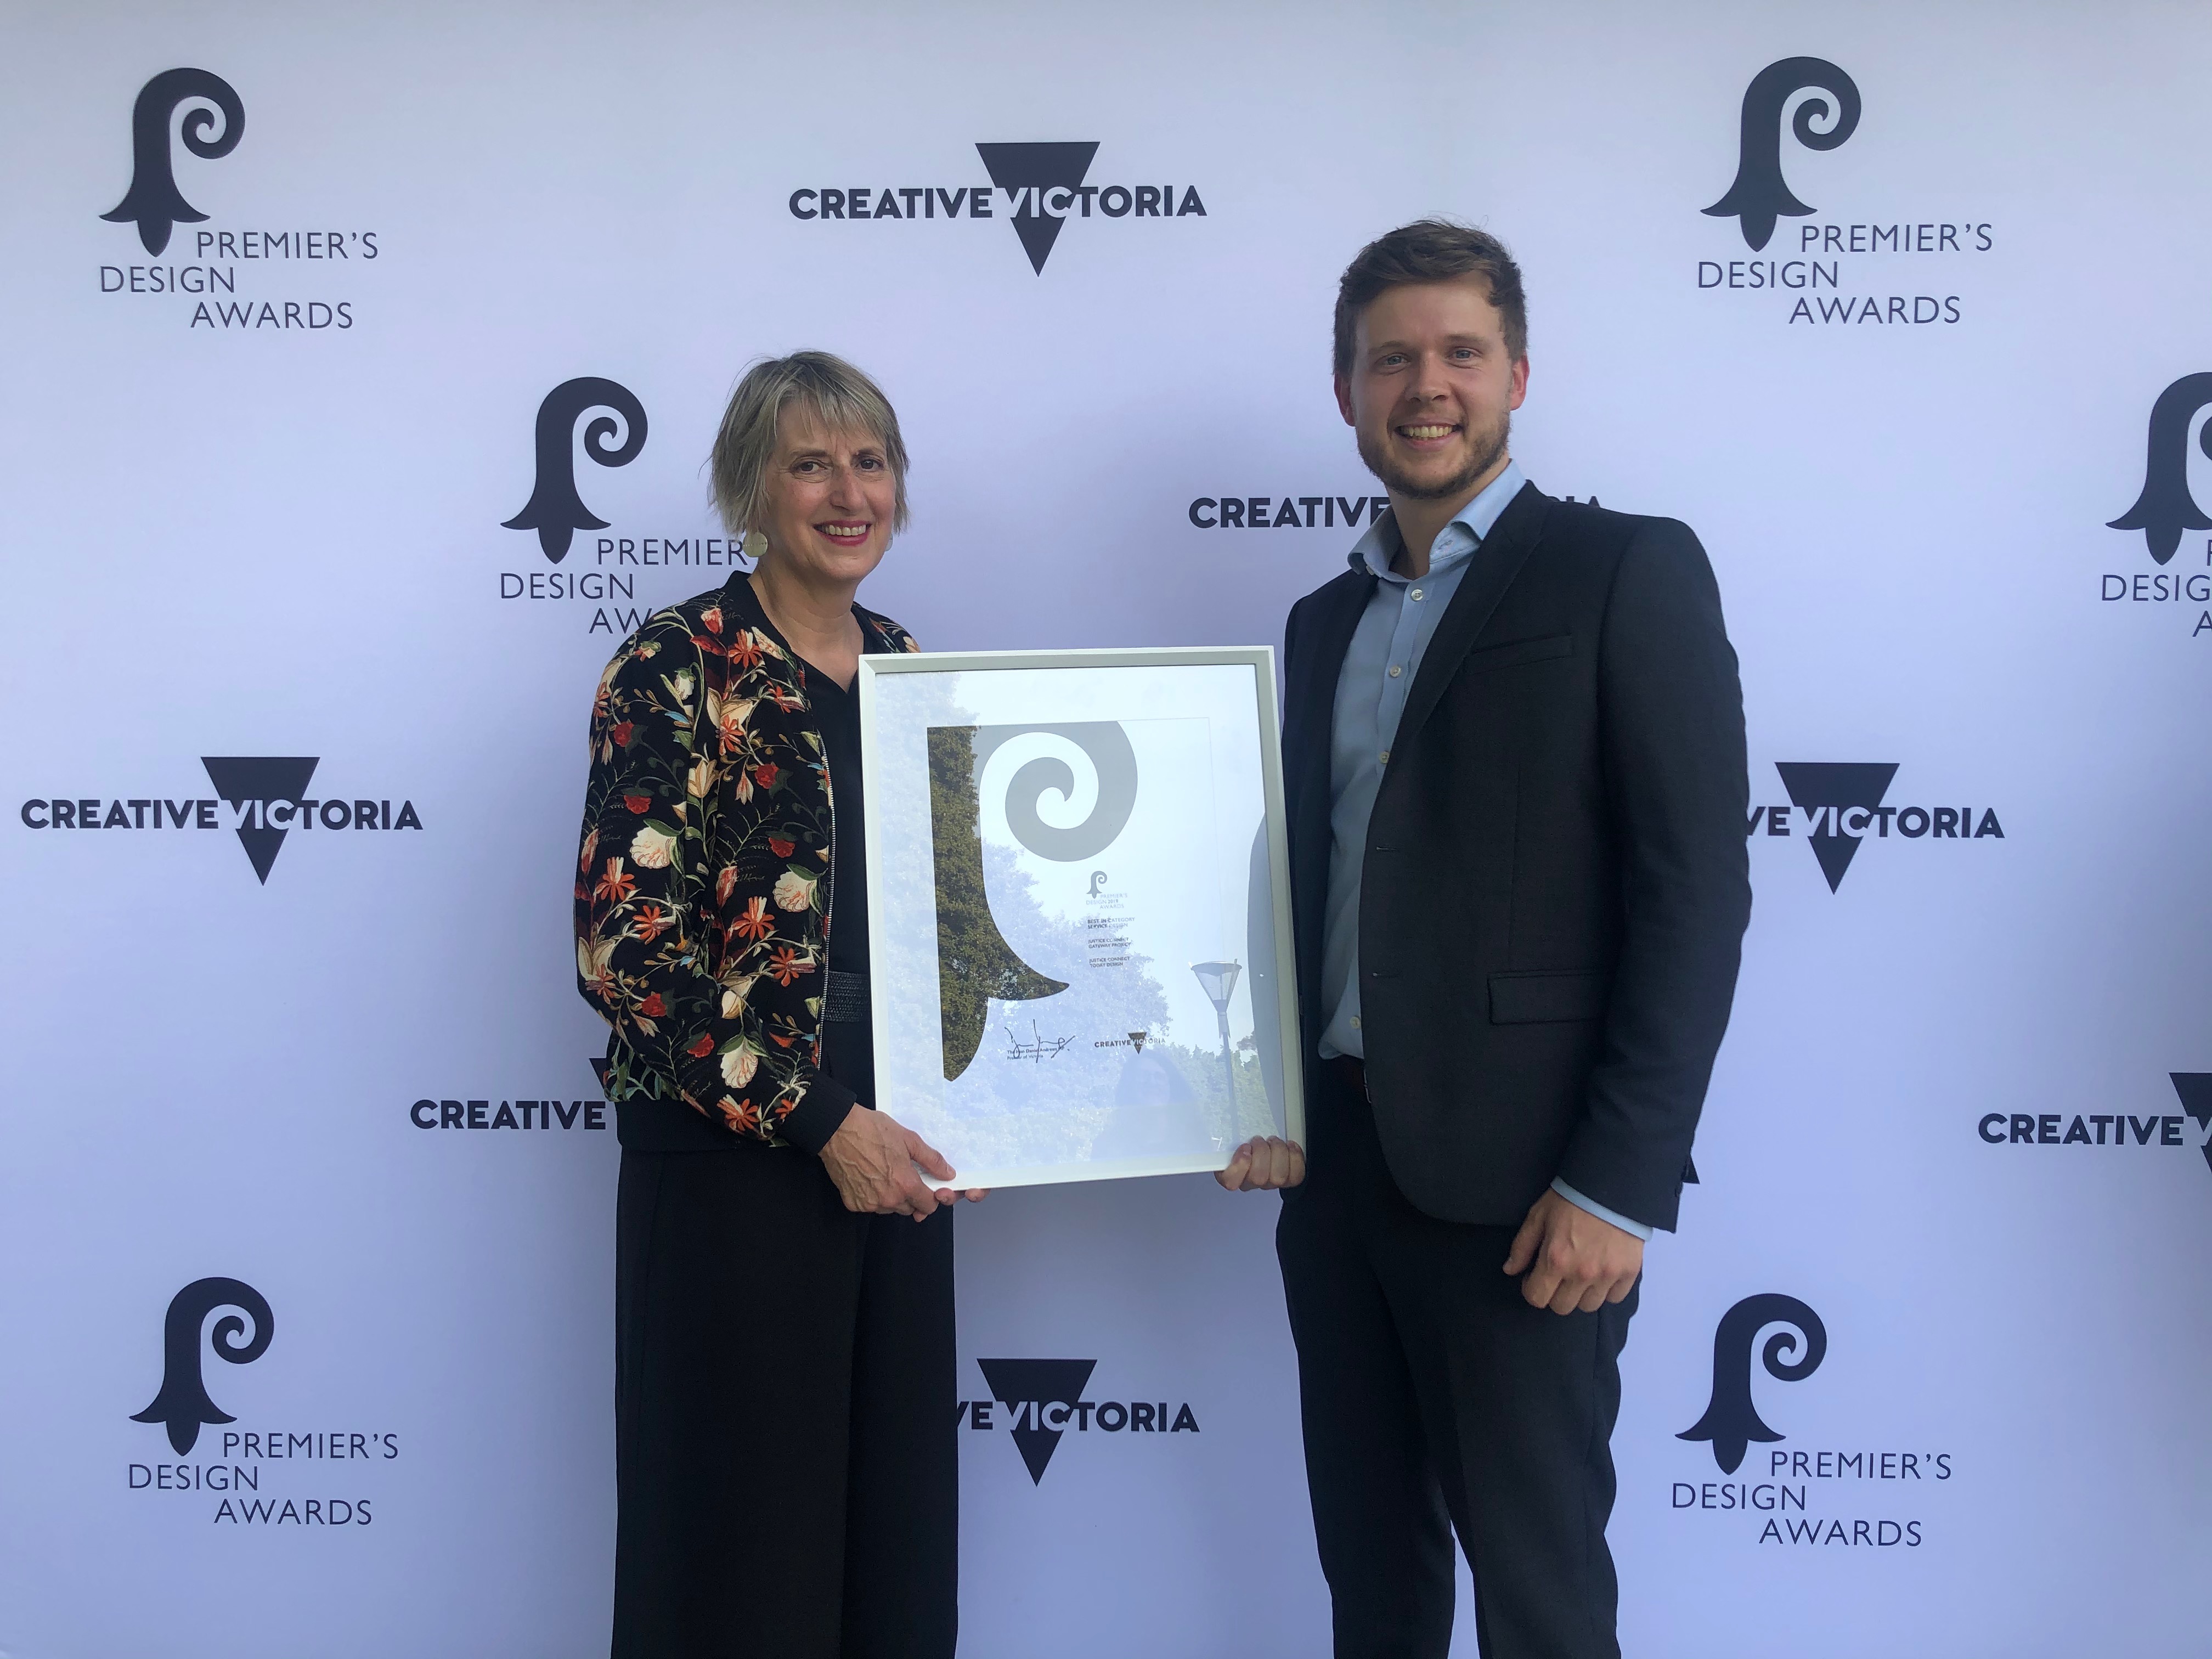 Tom and Sue collecting the Premier's Design Award